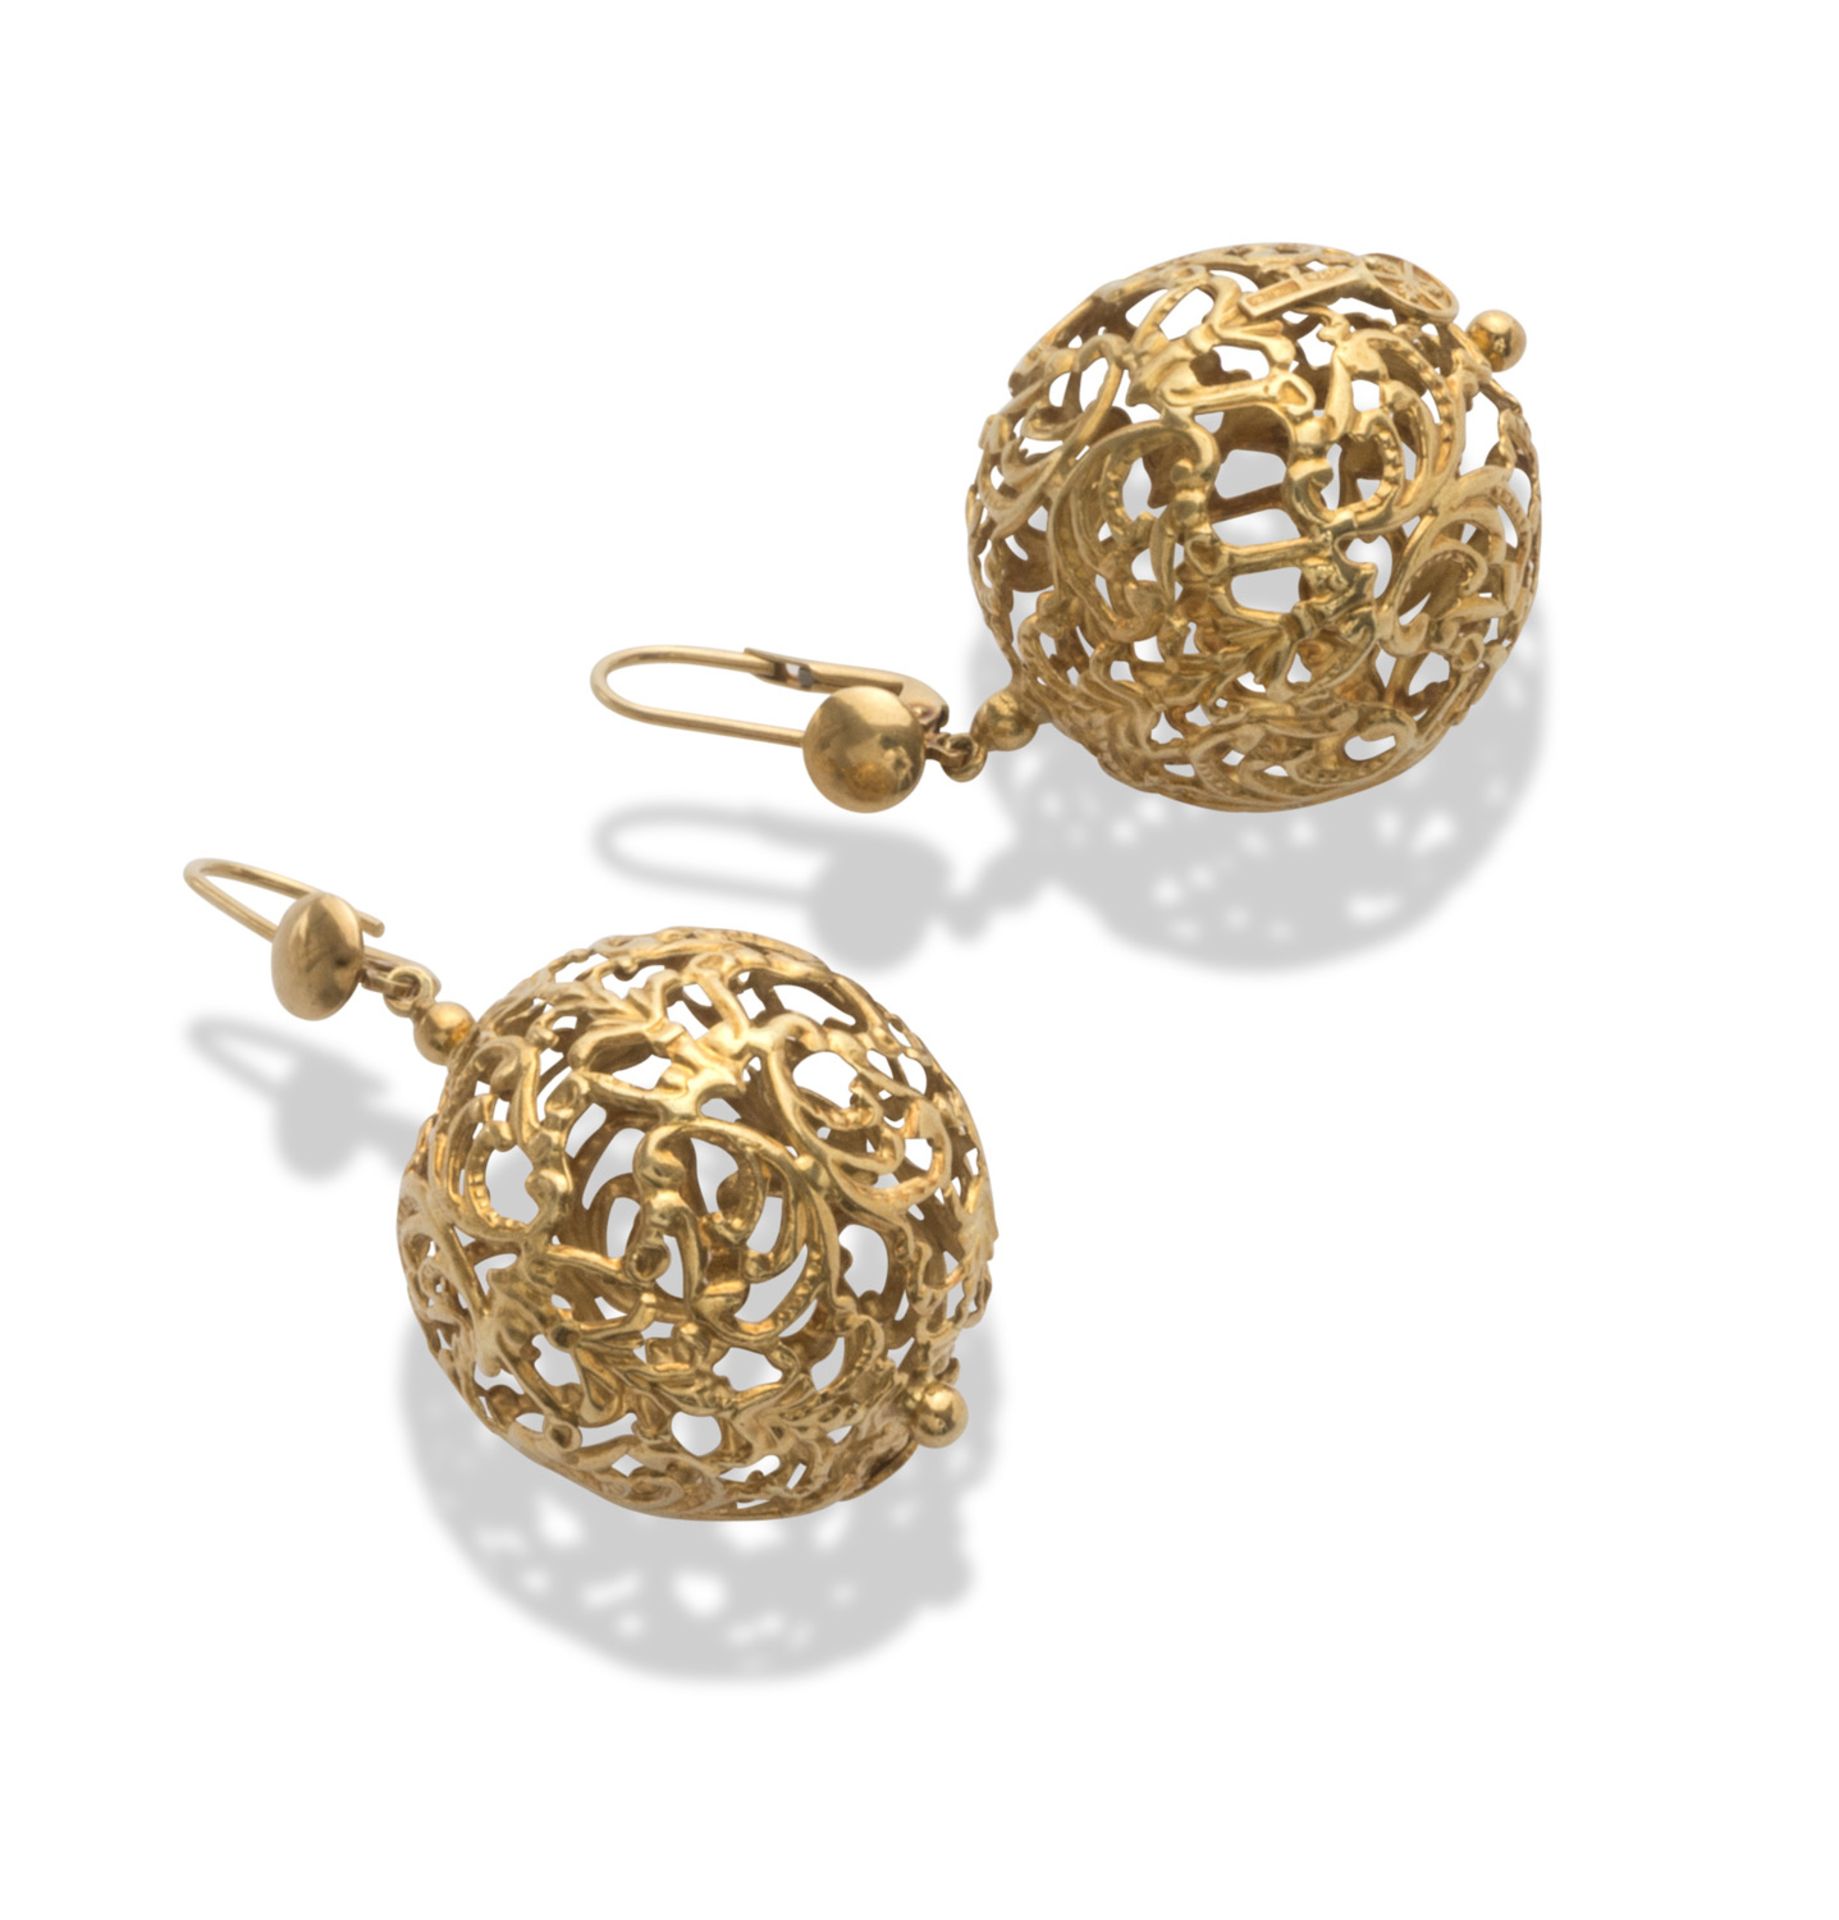 EARRINGS in yellow gold 18 kts., with sphere elements and pierced to scroll motifs. Length cm. 5,